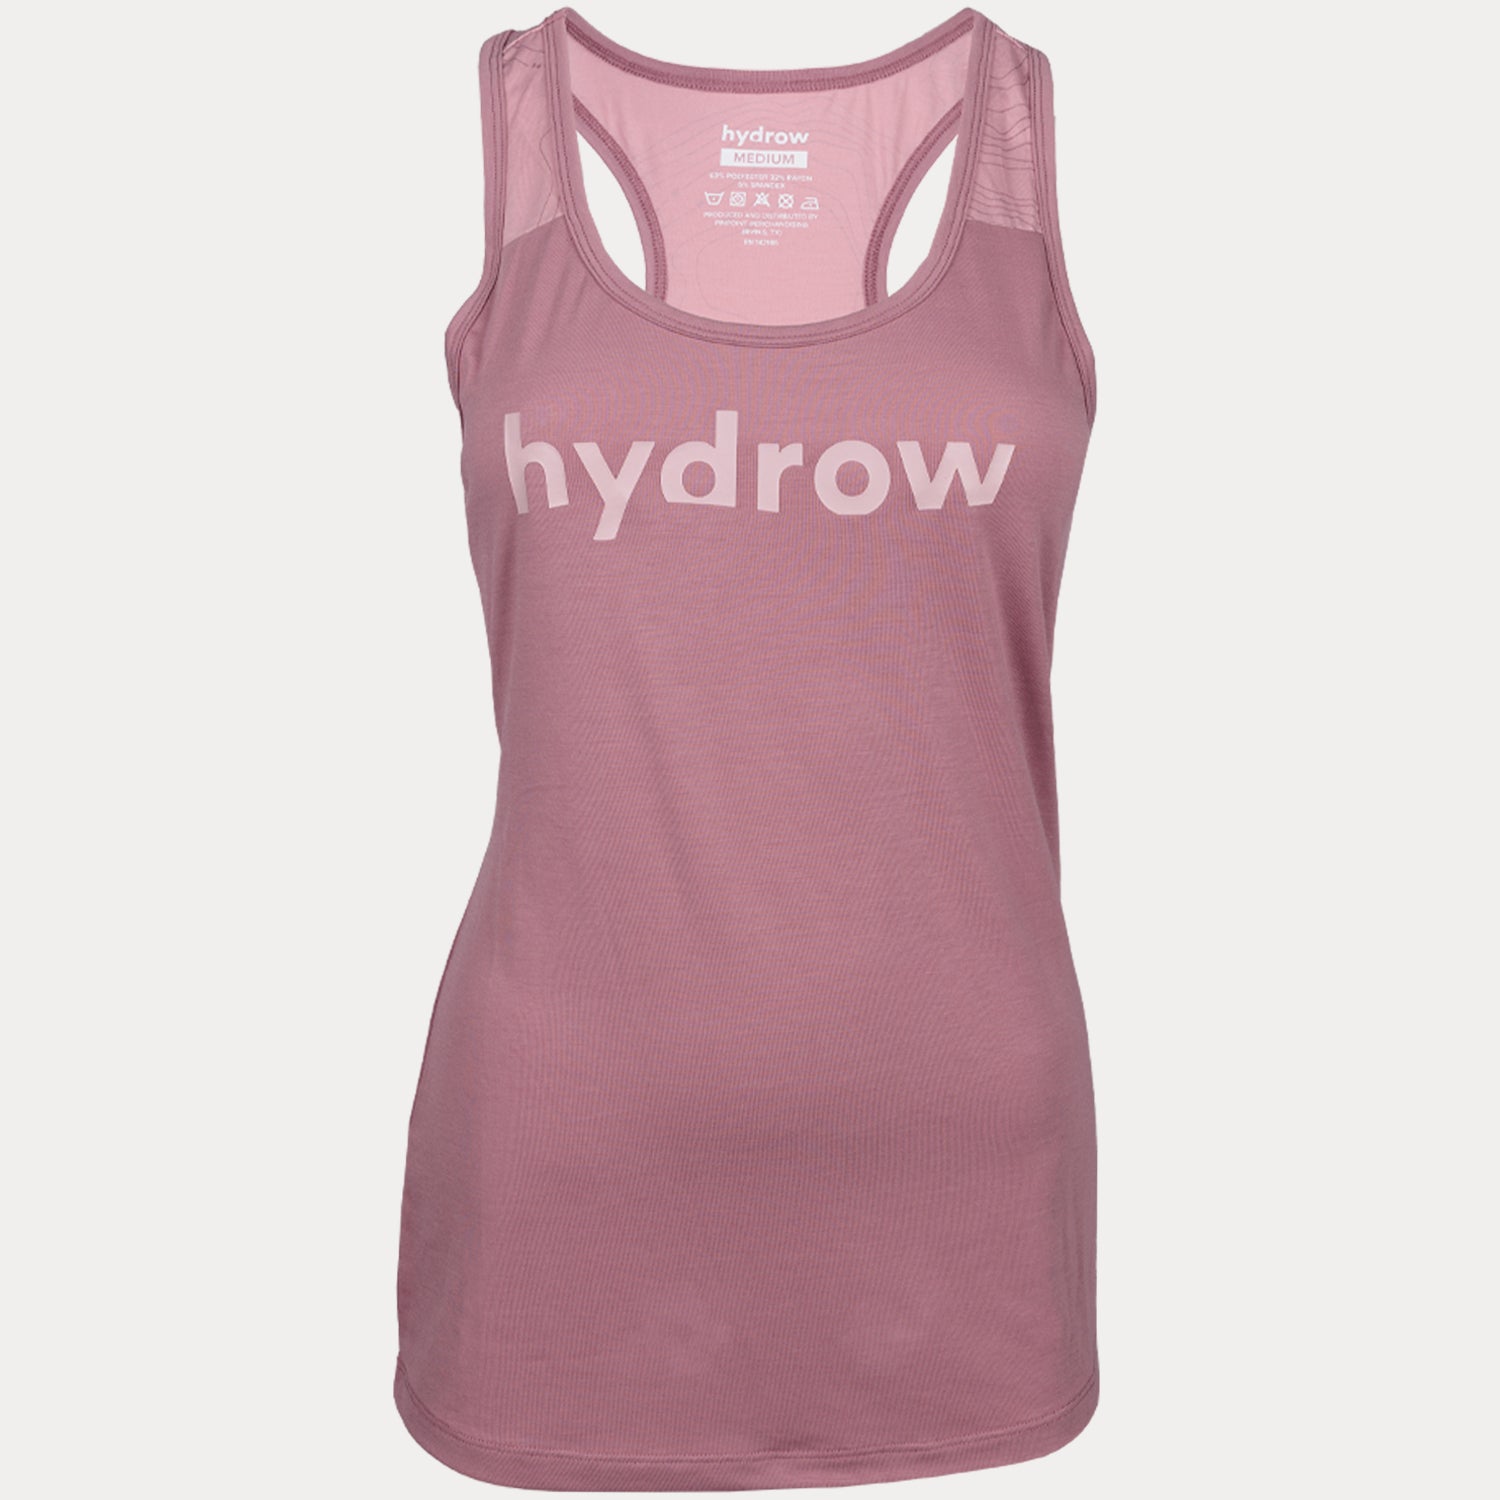 front view of performance tank in dusty mauve hydrow logo on chest